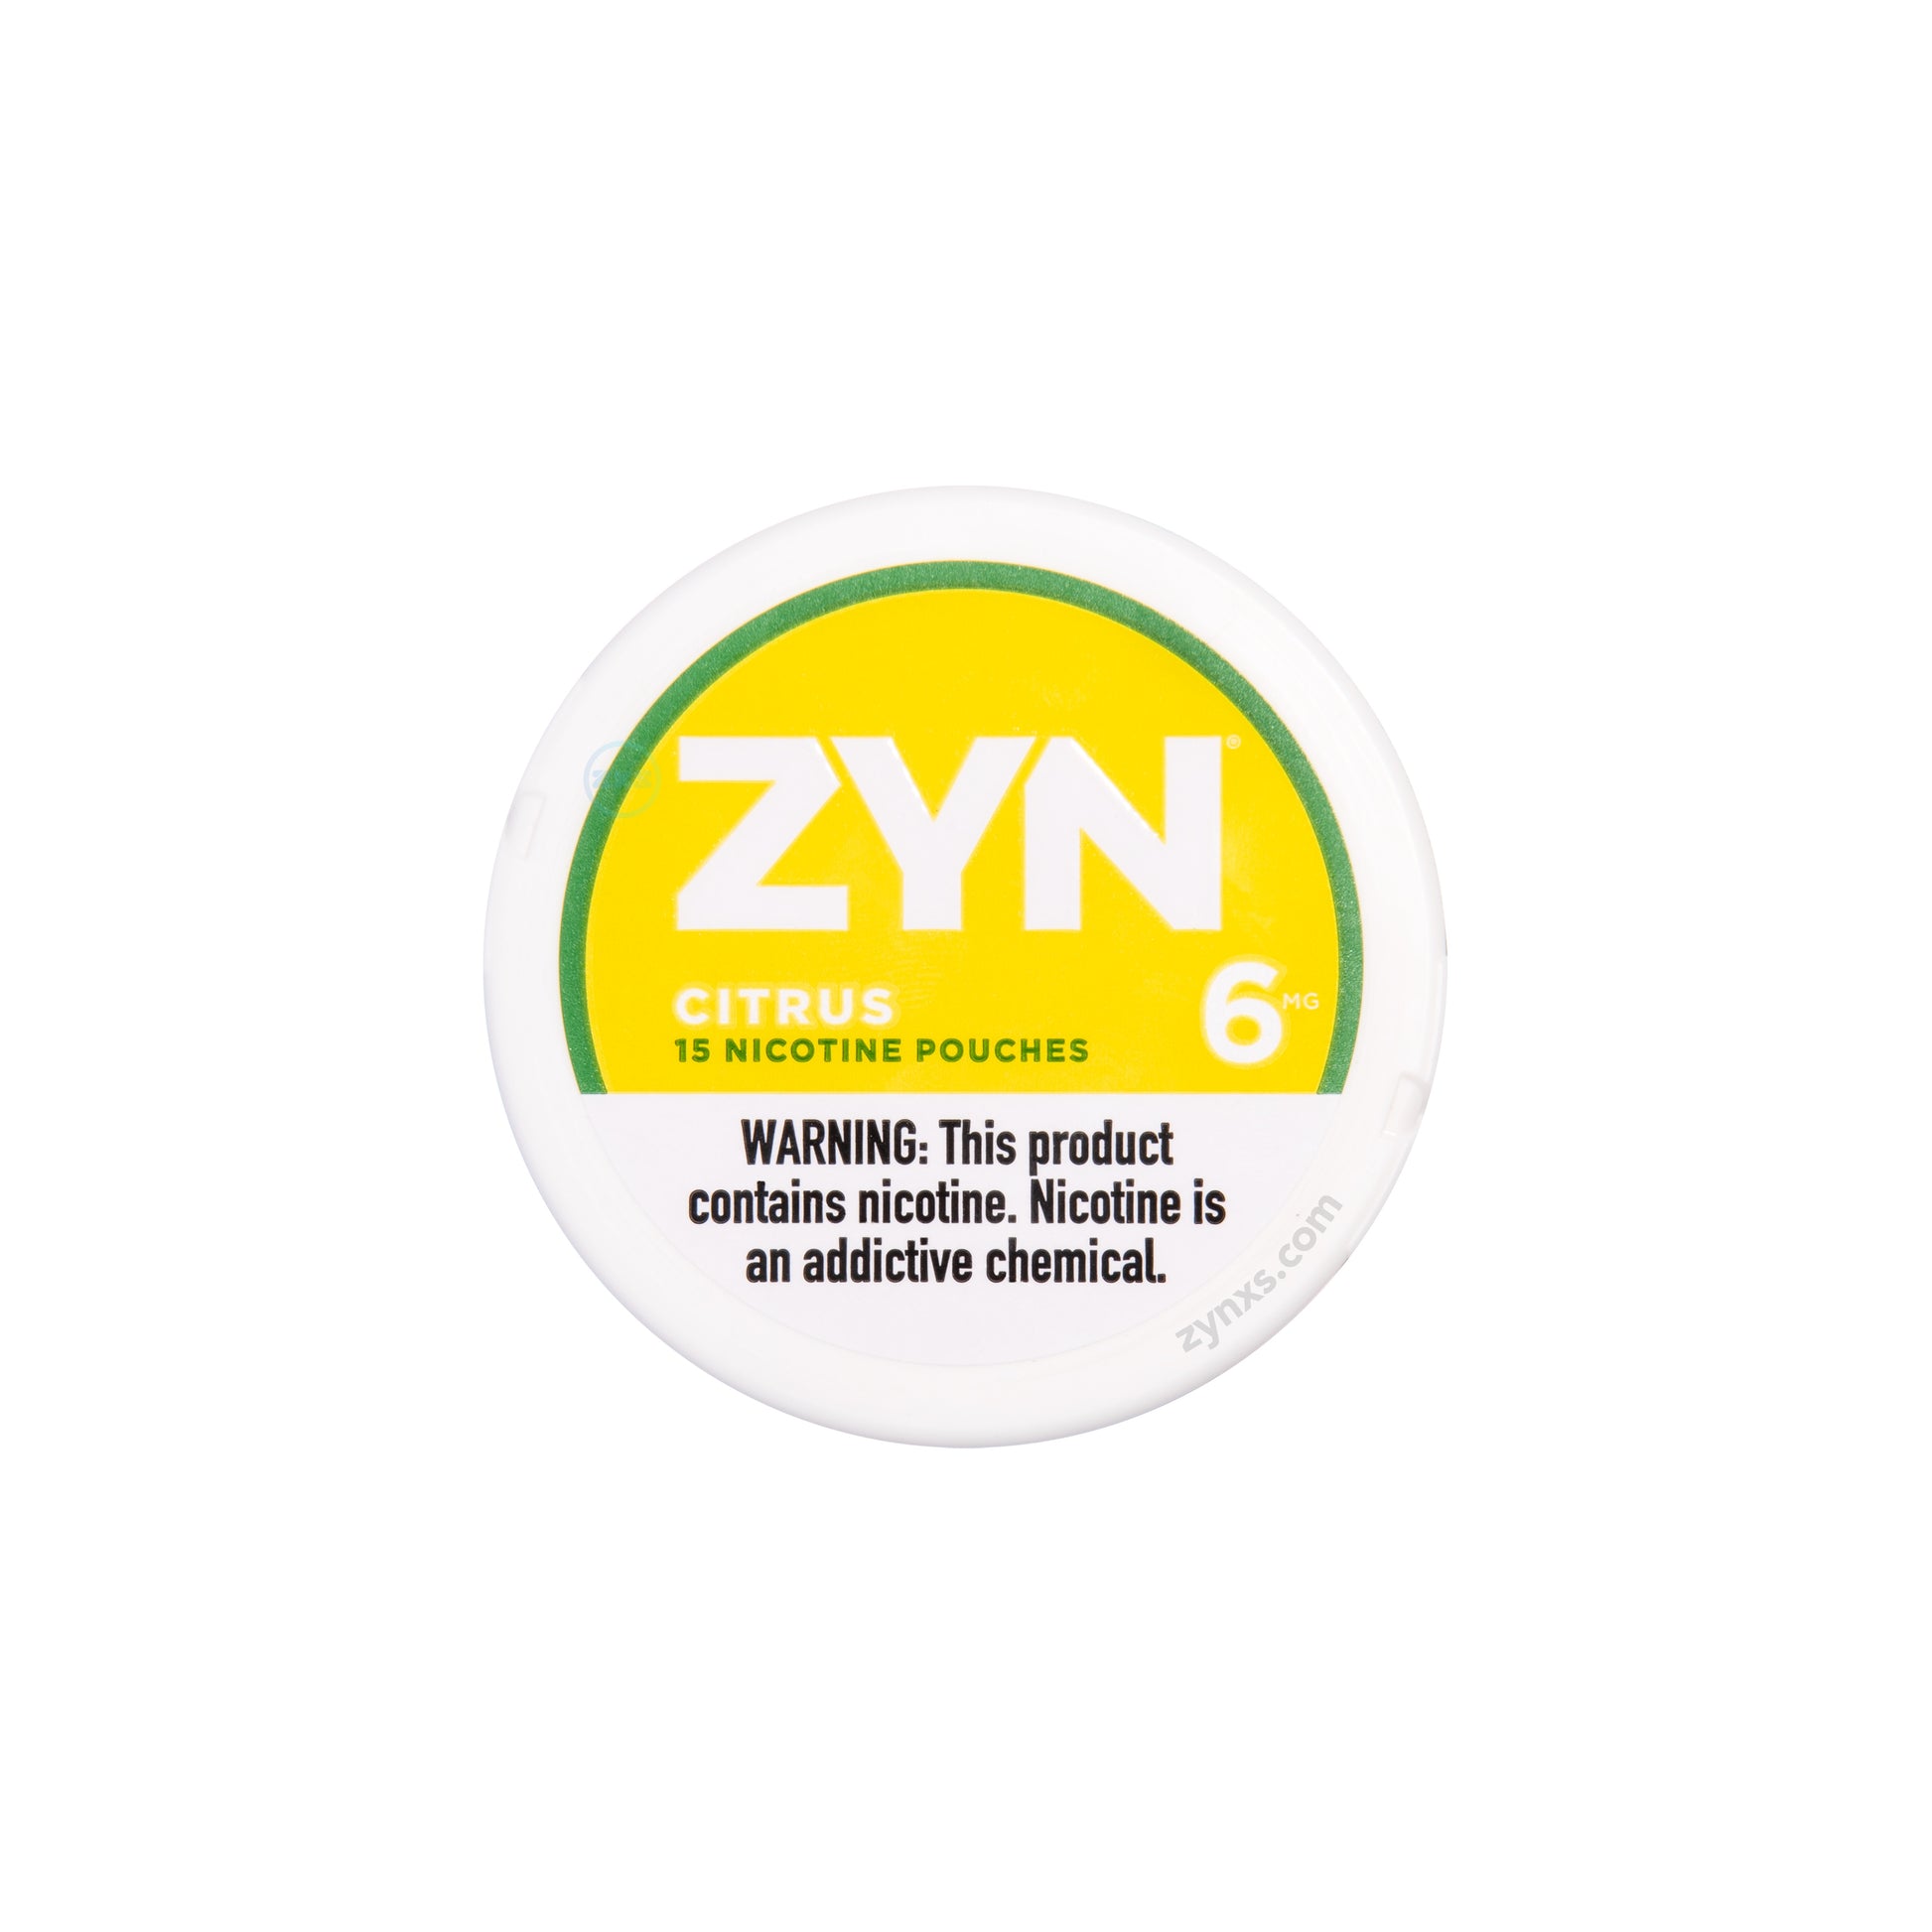 Zyn Citrus 6 MG nicotine pouches packaging. The package features a vibrant orange and yellow color scheme, symbolizing the citrus flavor.